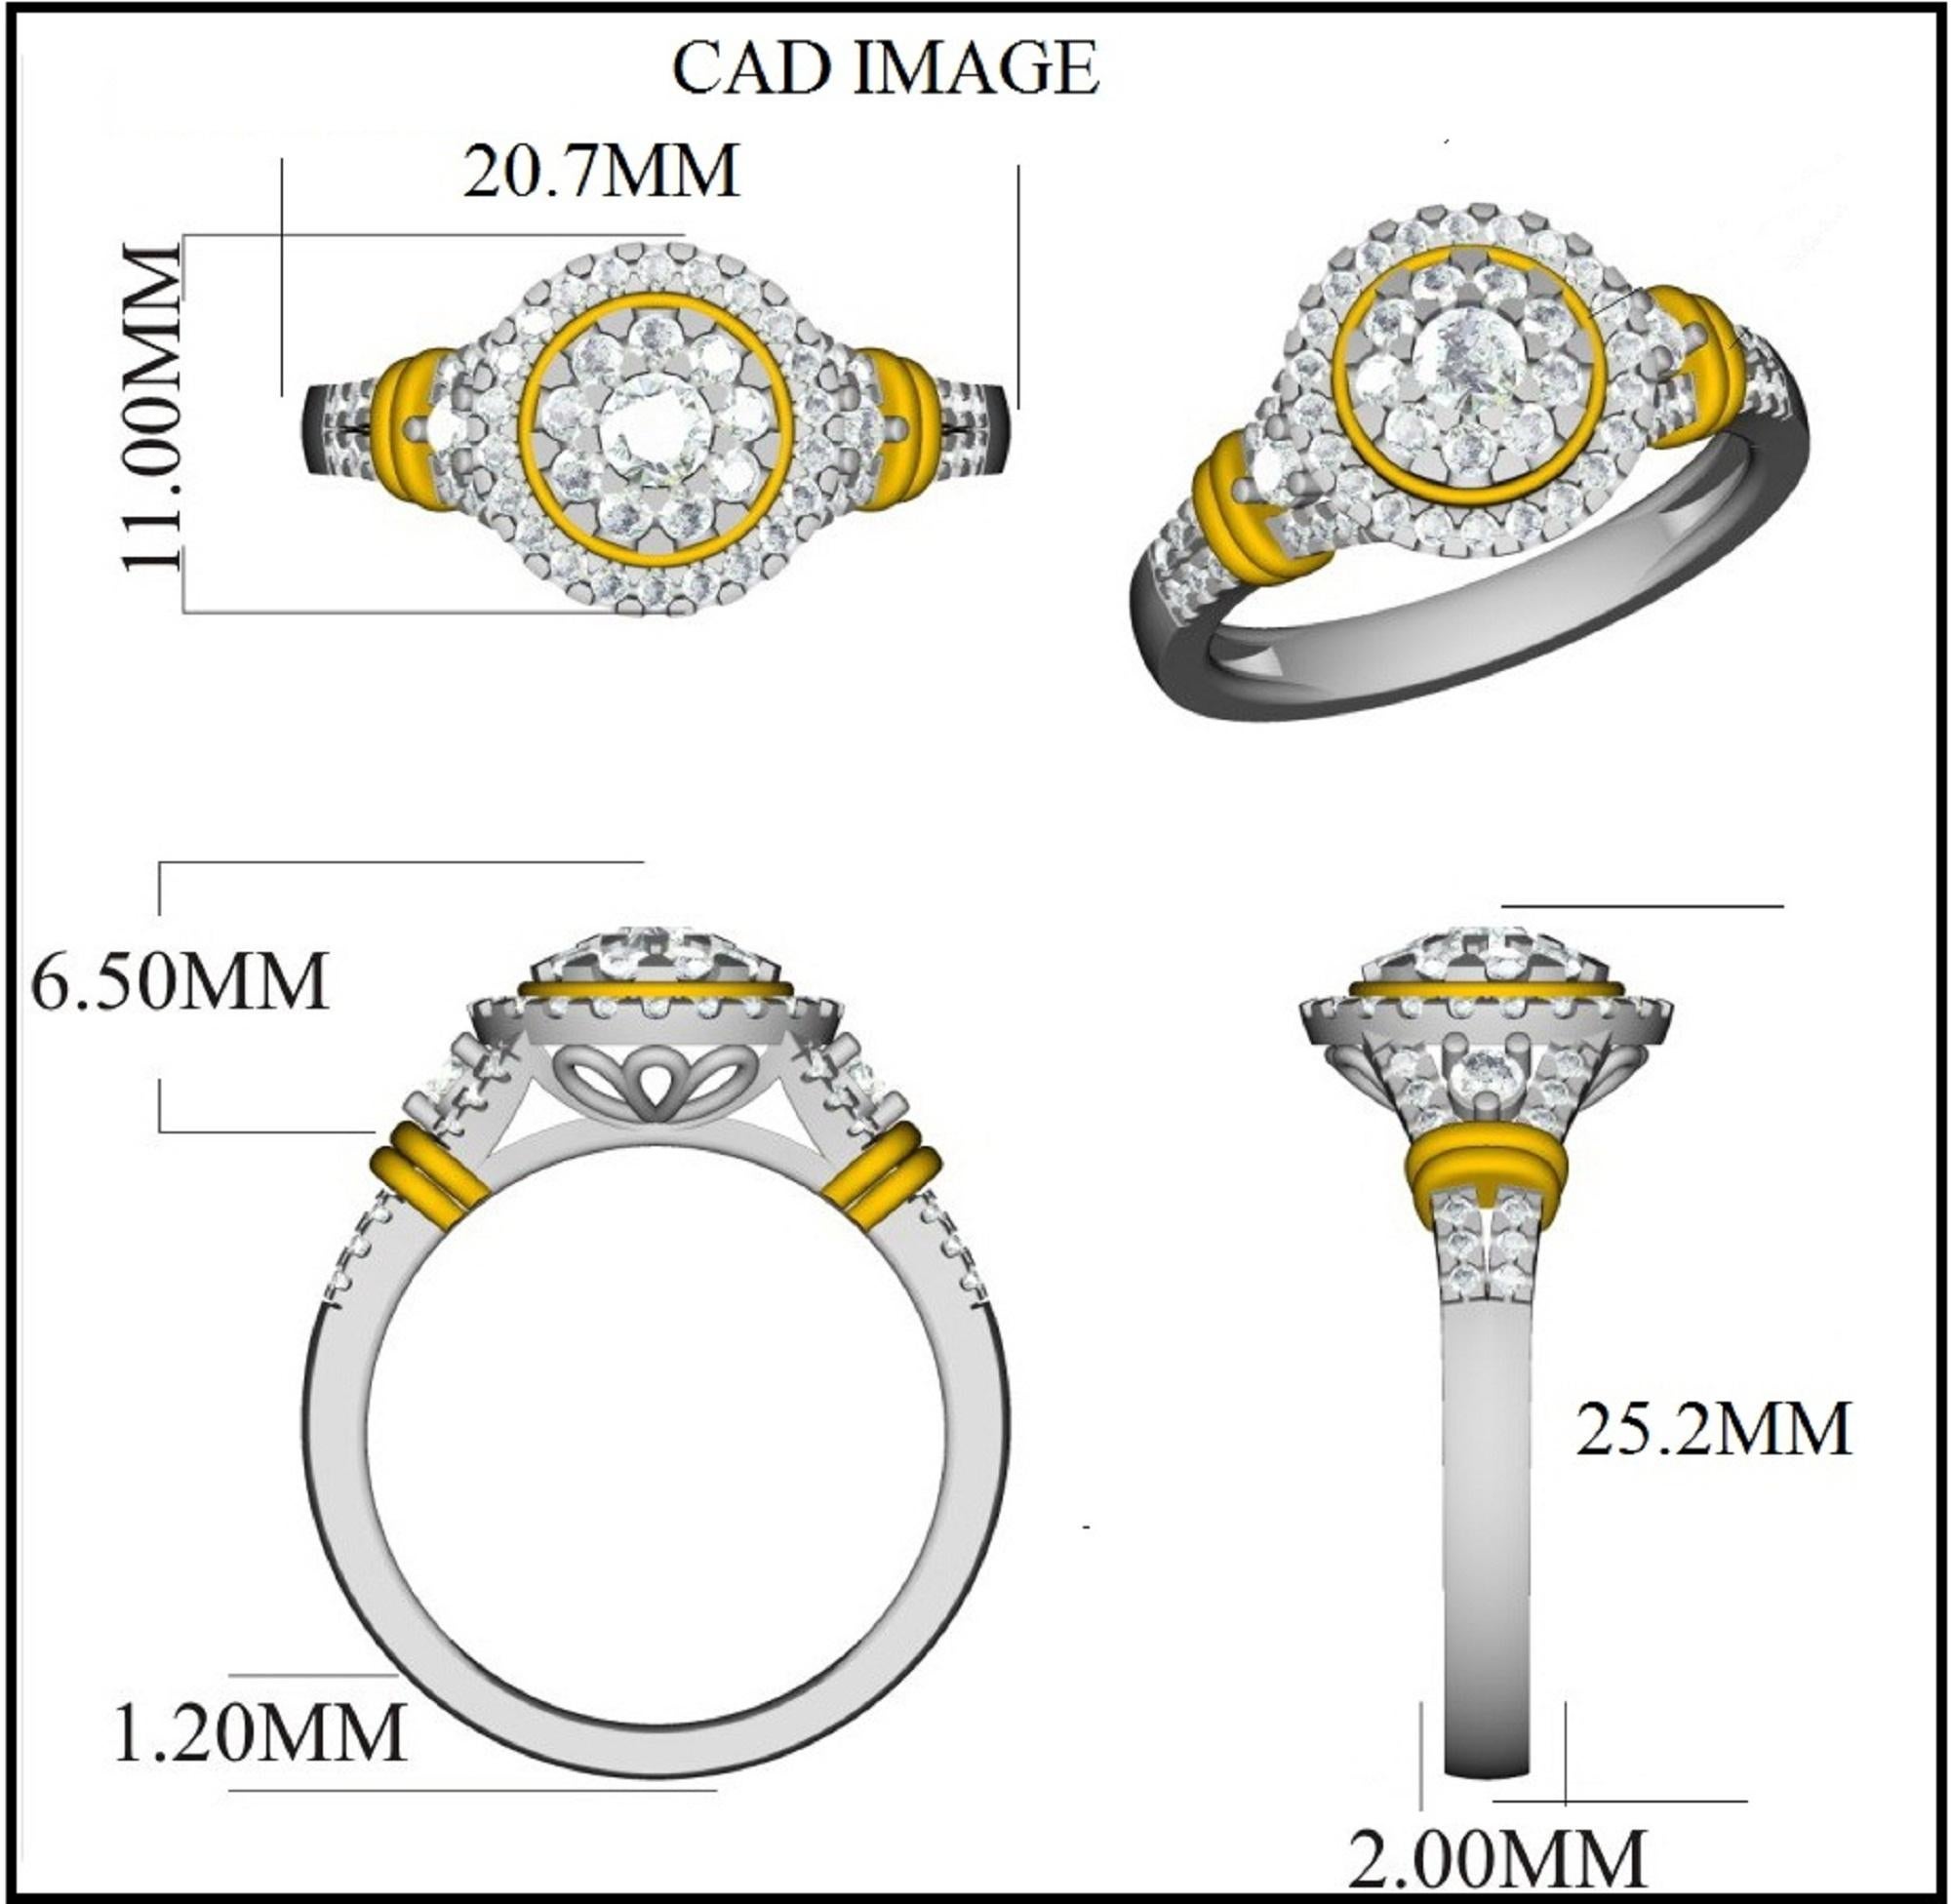 This Round Diamond Cluster Engagement Ring in 14K yellow gold showcases 0.75 carats of sparkling 58 round diamonds embedded with prong and micro-prong setting, Shine in H-I color I2 clarity. Featuring a fabulous cluster design and a highly polished